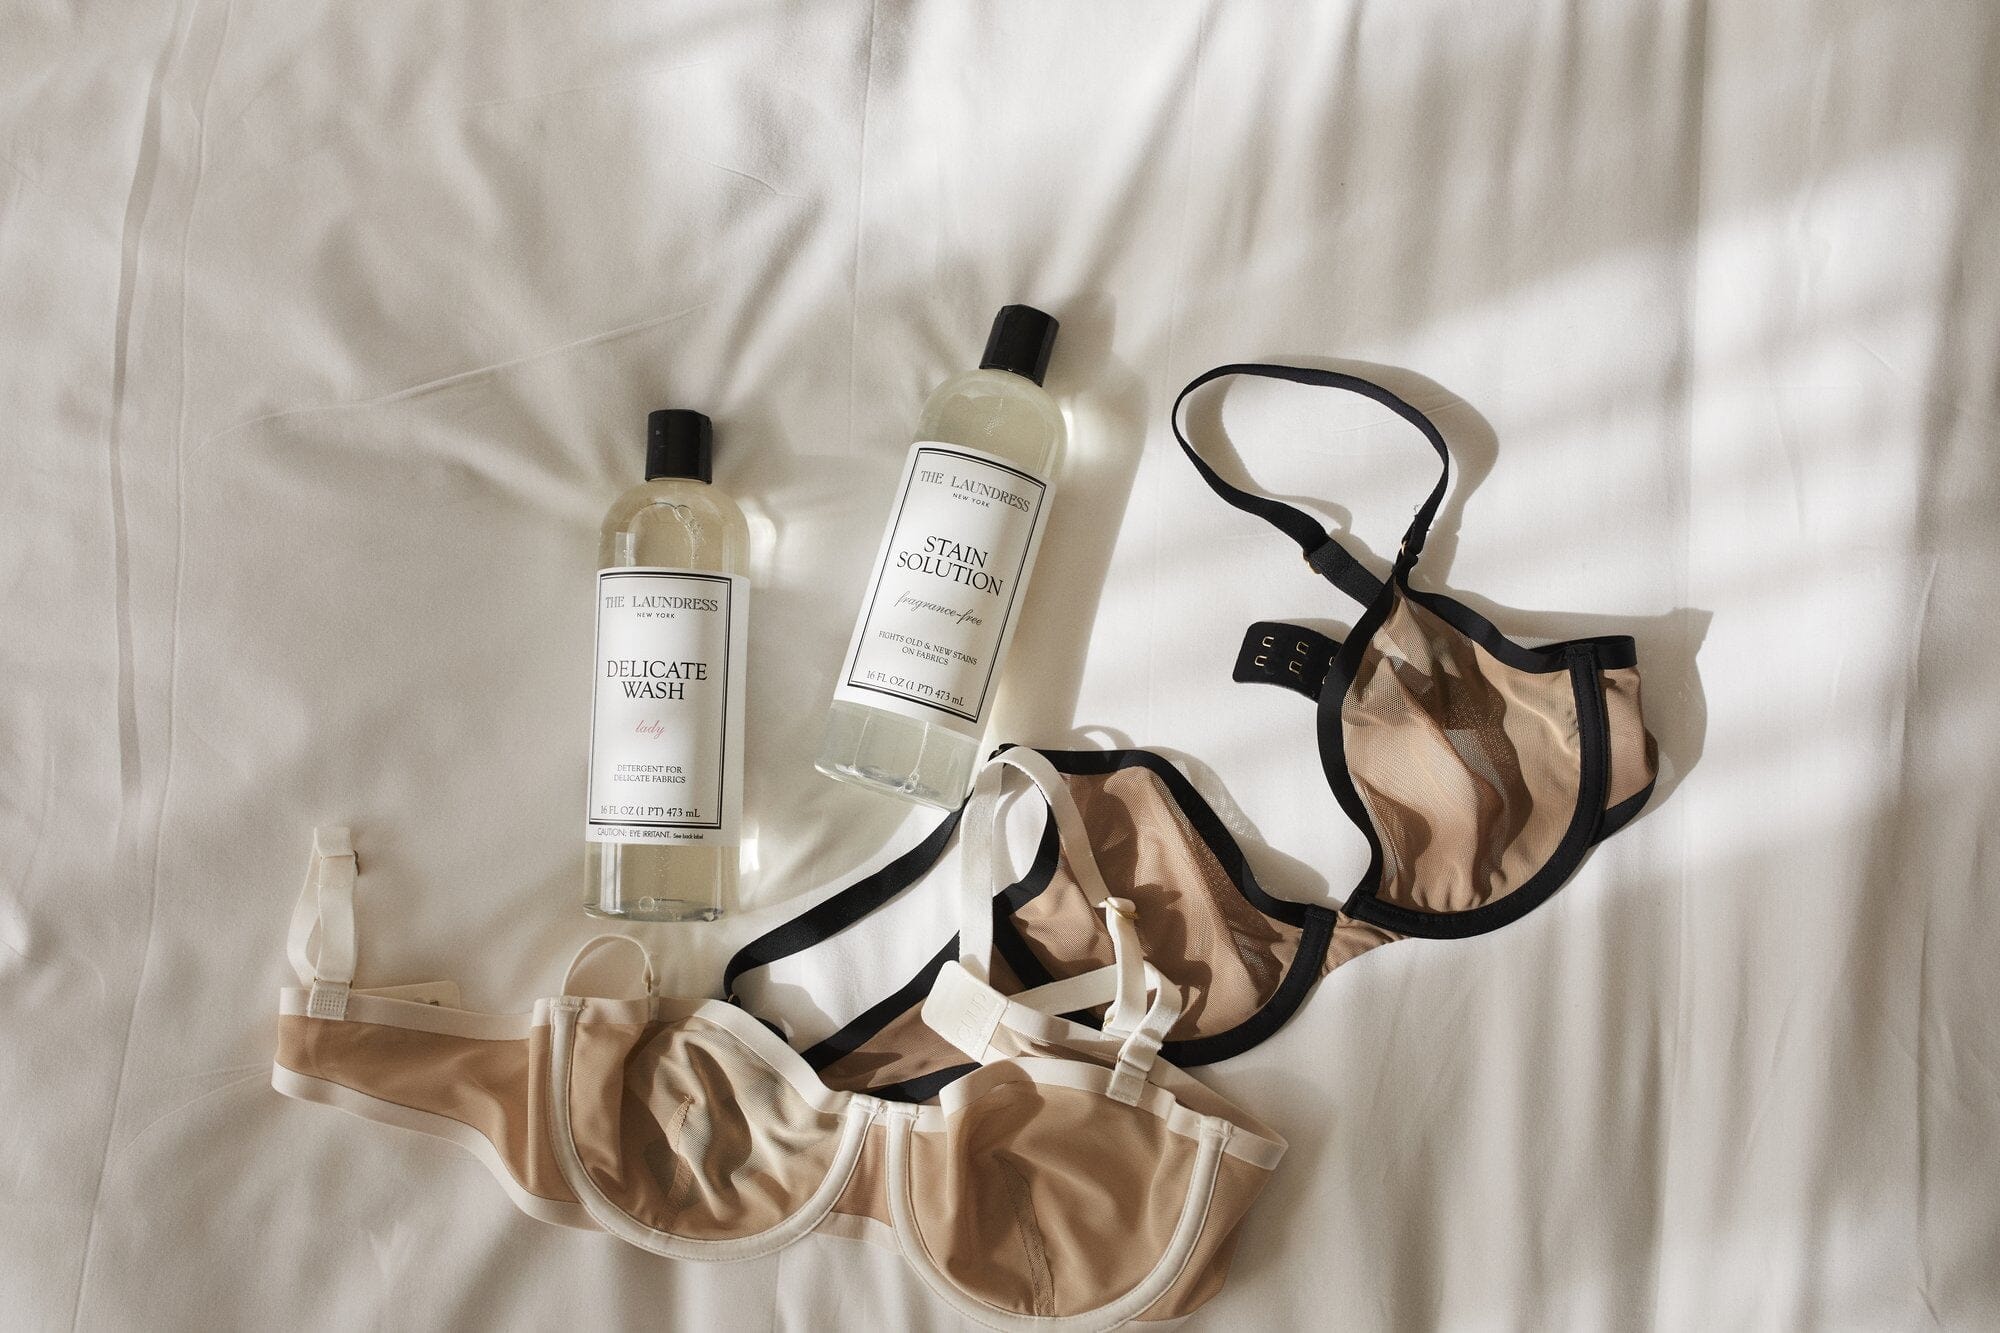 How To Remove Stains from Your Expensive Lingerie?